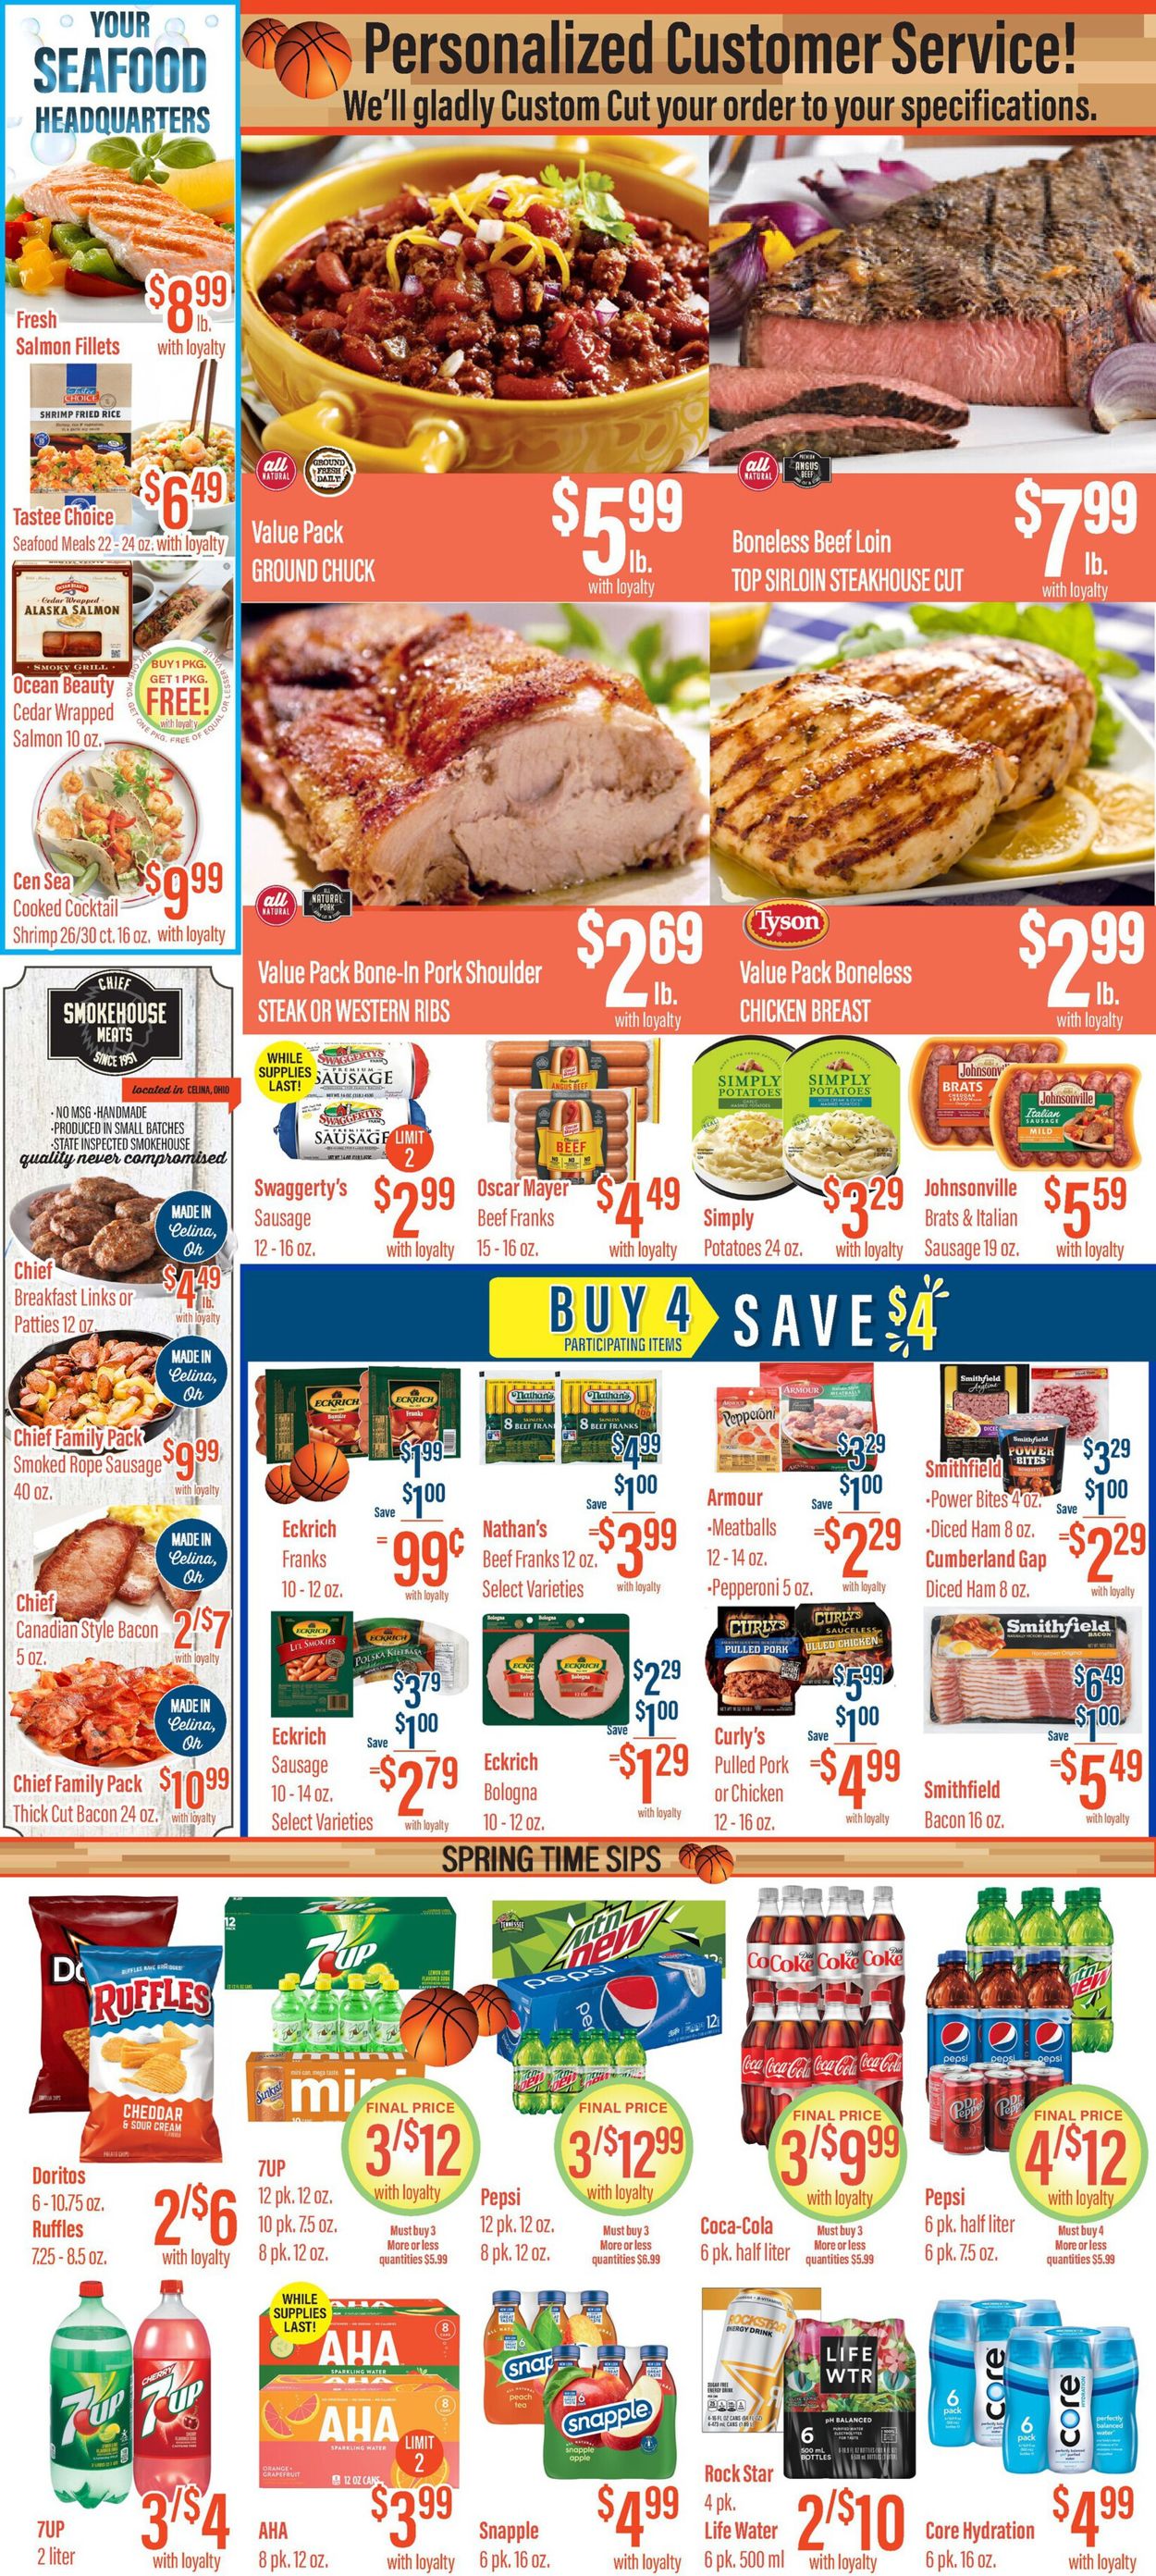 Remke Markets Ad from 03/17/2022